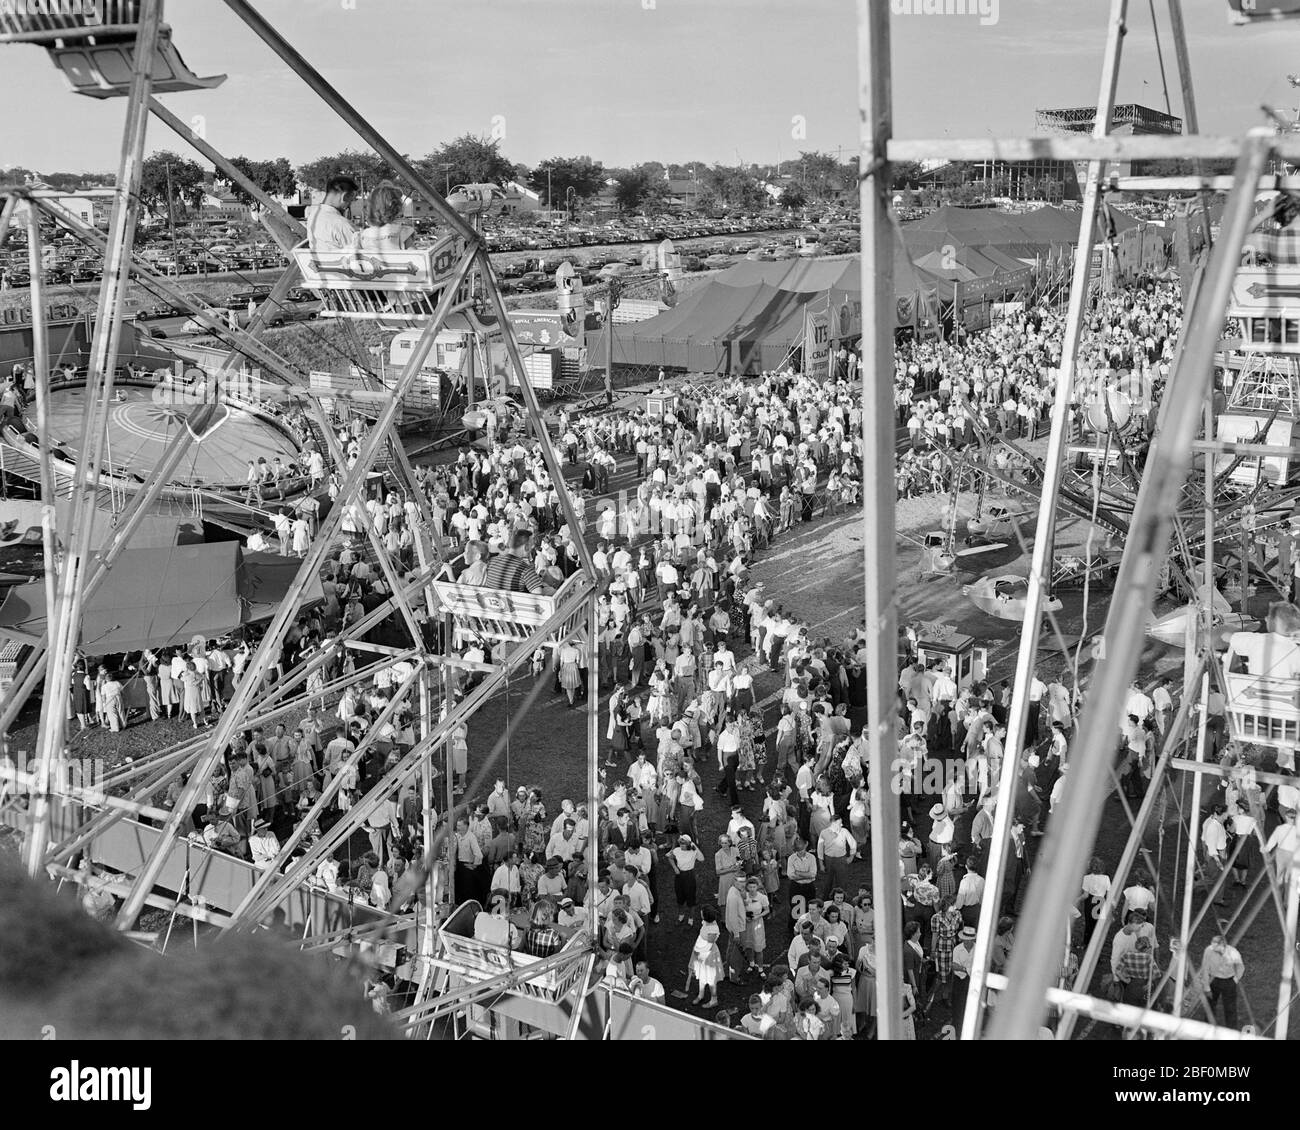 1940s ELEVATED VIEW PHOTOGRAPHED FROM FERRIS WHEEL OF PEOPLE ATTENDING STATE FAIR ST PAUL MINNESOTA USA - f1254 HAR001 HARS FEMALES ASSEMBLY UNITED STATES COPY SPACE LADIES MASS PERSONS UNITED STATES OF AMERICA MALES CARNIVAL ENTERTAINMENT PAUL SPECTATORS B&W GATHERING NORTH AMERICA NORTH AMERICAN ST HIGH ANGLE ADVENTURE DISCOVERY LEISURE EXCITEMENT RECREATION OPPORTUNITY FERRIS TENTS ELEVATED MIDWAY ATTENDING JUVENILES PHOTOGRAPHED RIDES THRONG AMUSEMENT PARK ATTENDANCE BLACK AND WHITE HAR001 MINNESOTA OLD FASHIONED THEME PARK Stock Photo